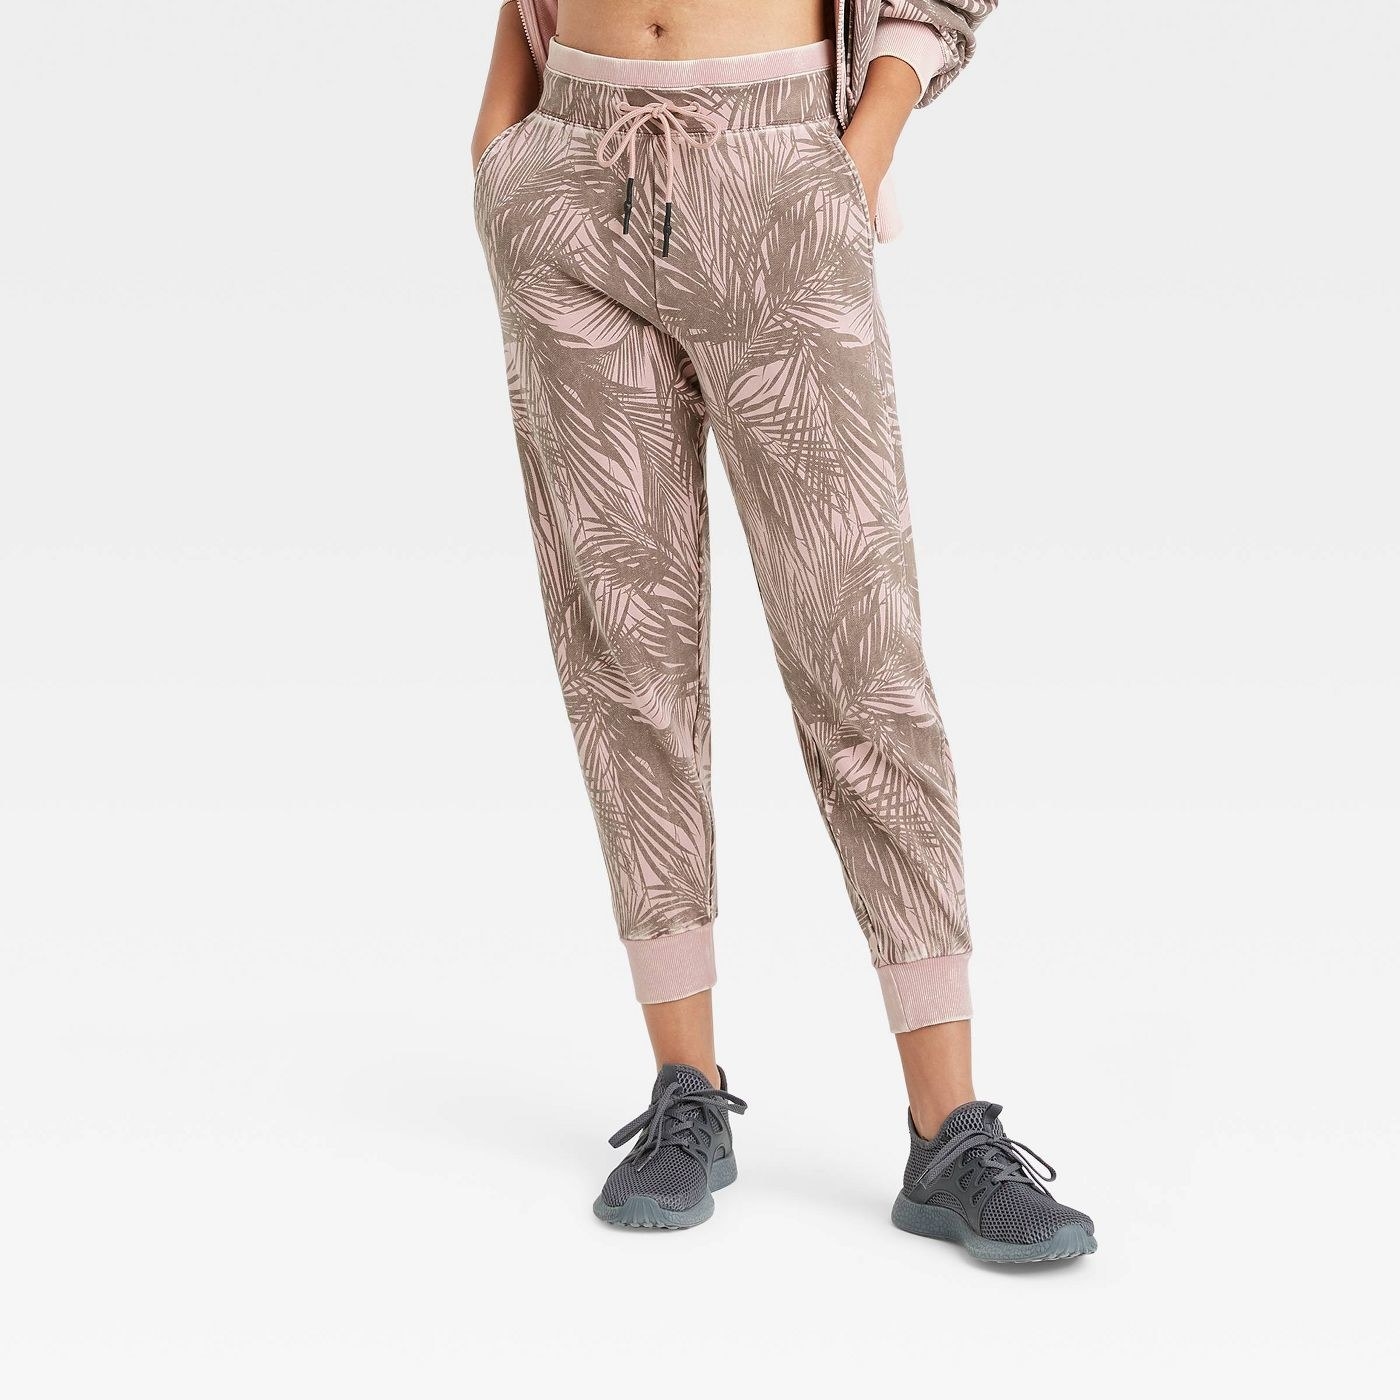 model wearing light pant joggers with leafy print